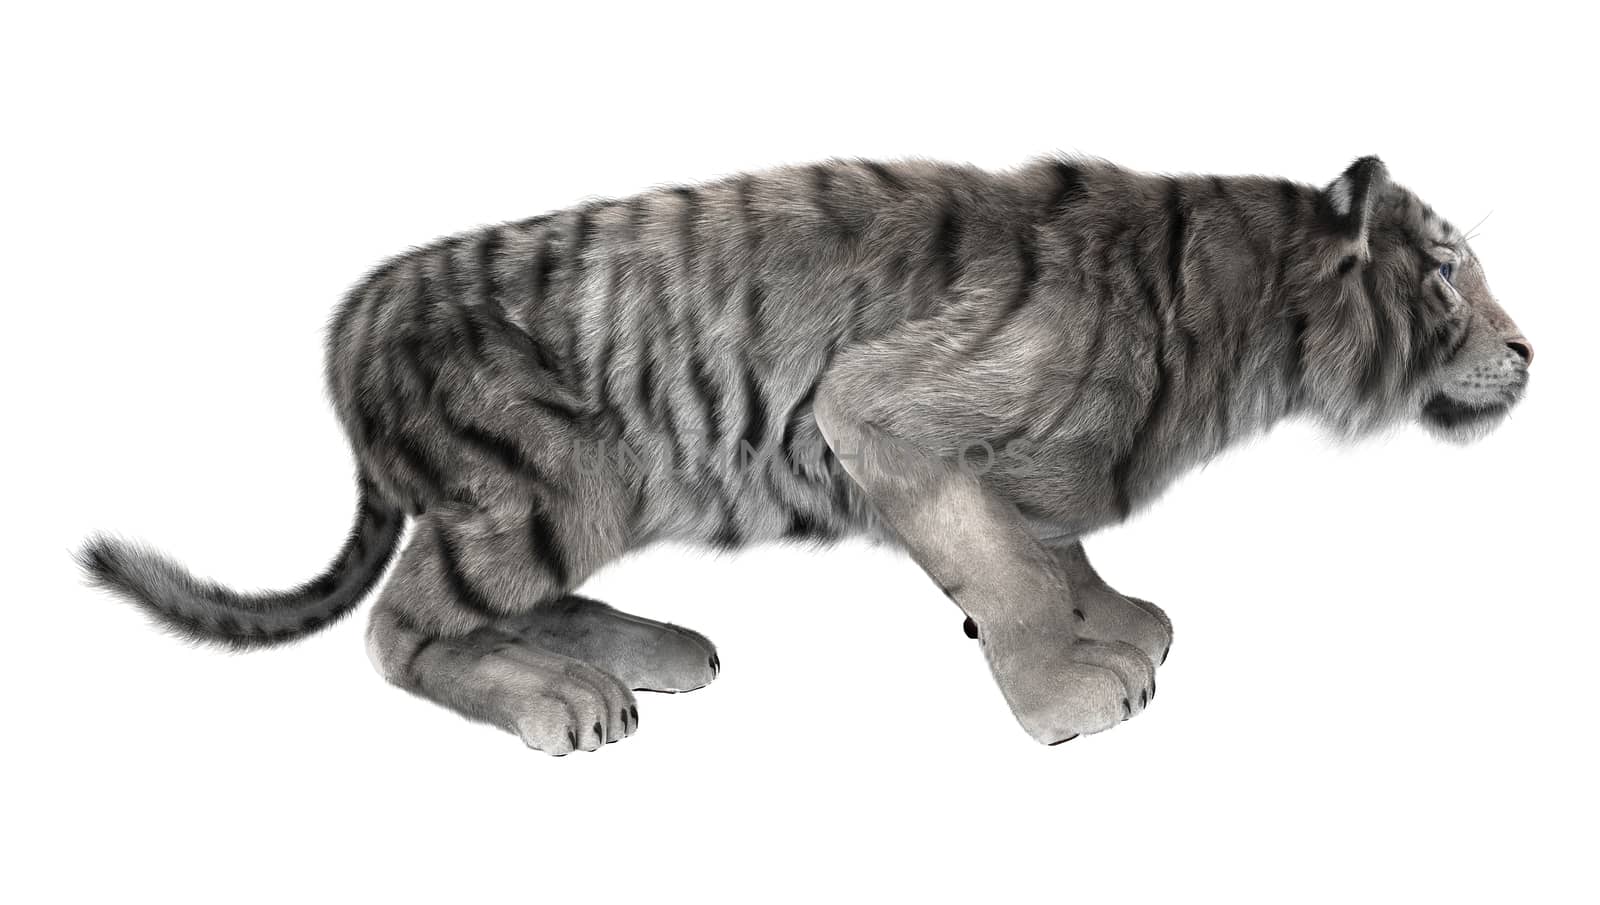 3D digital render of a white tiger hunting isolated on white background